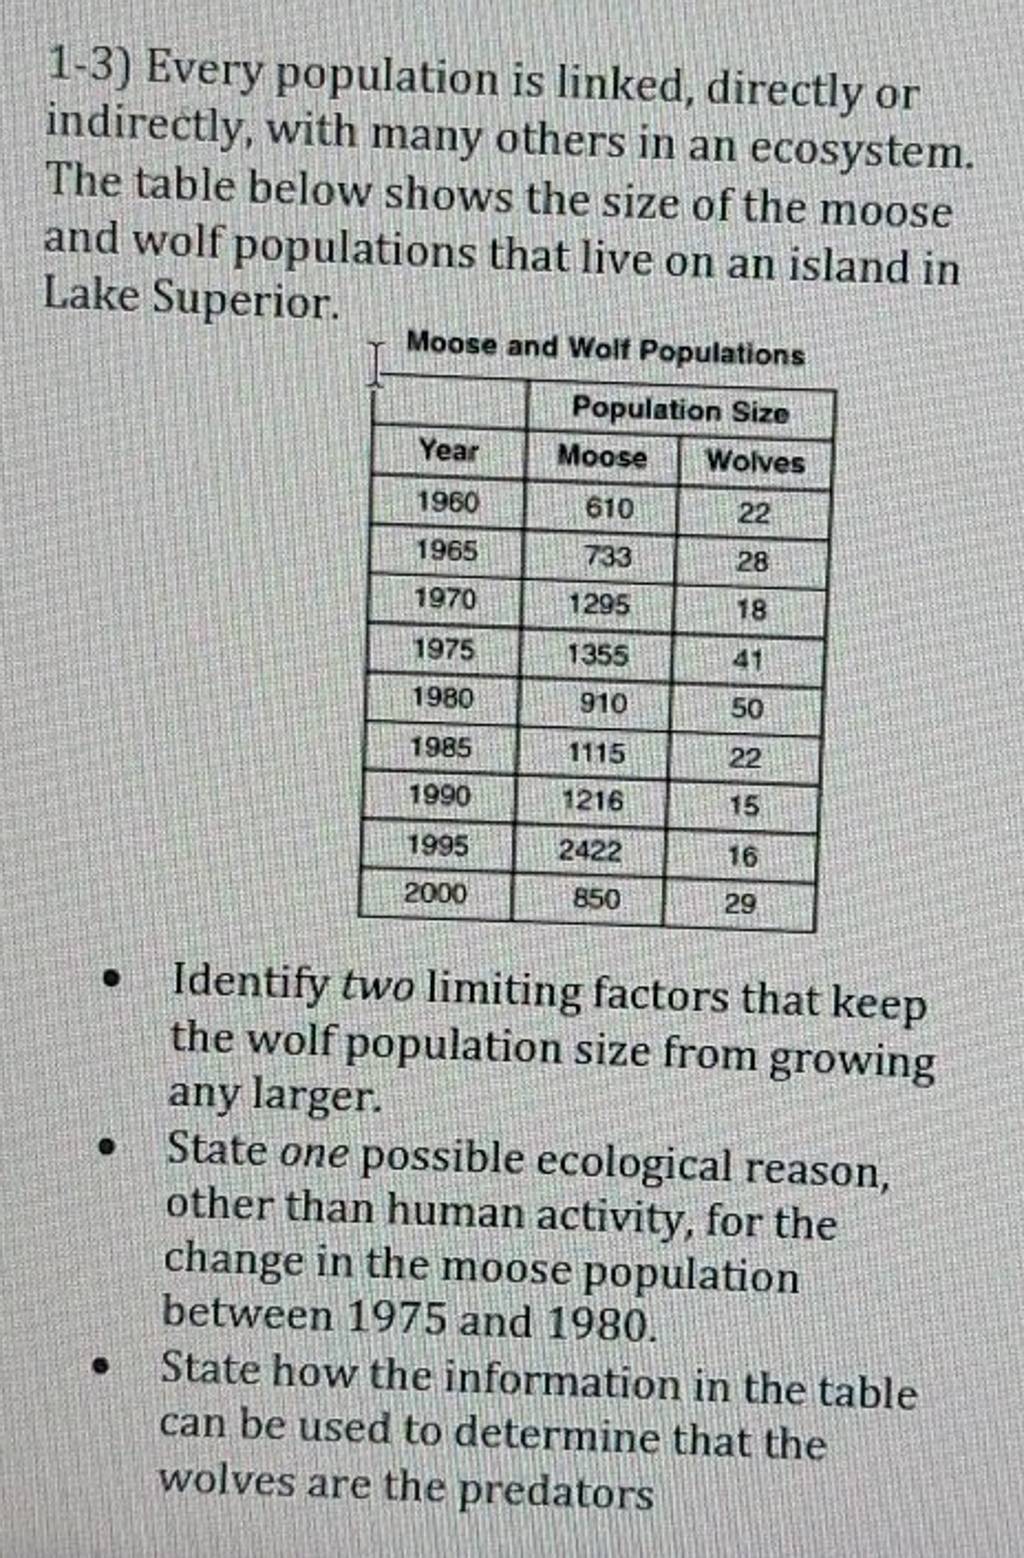 1-3) Every population is linked, directly or indirectly, with many oth